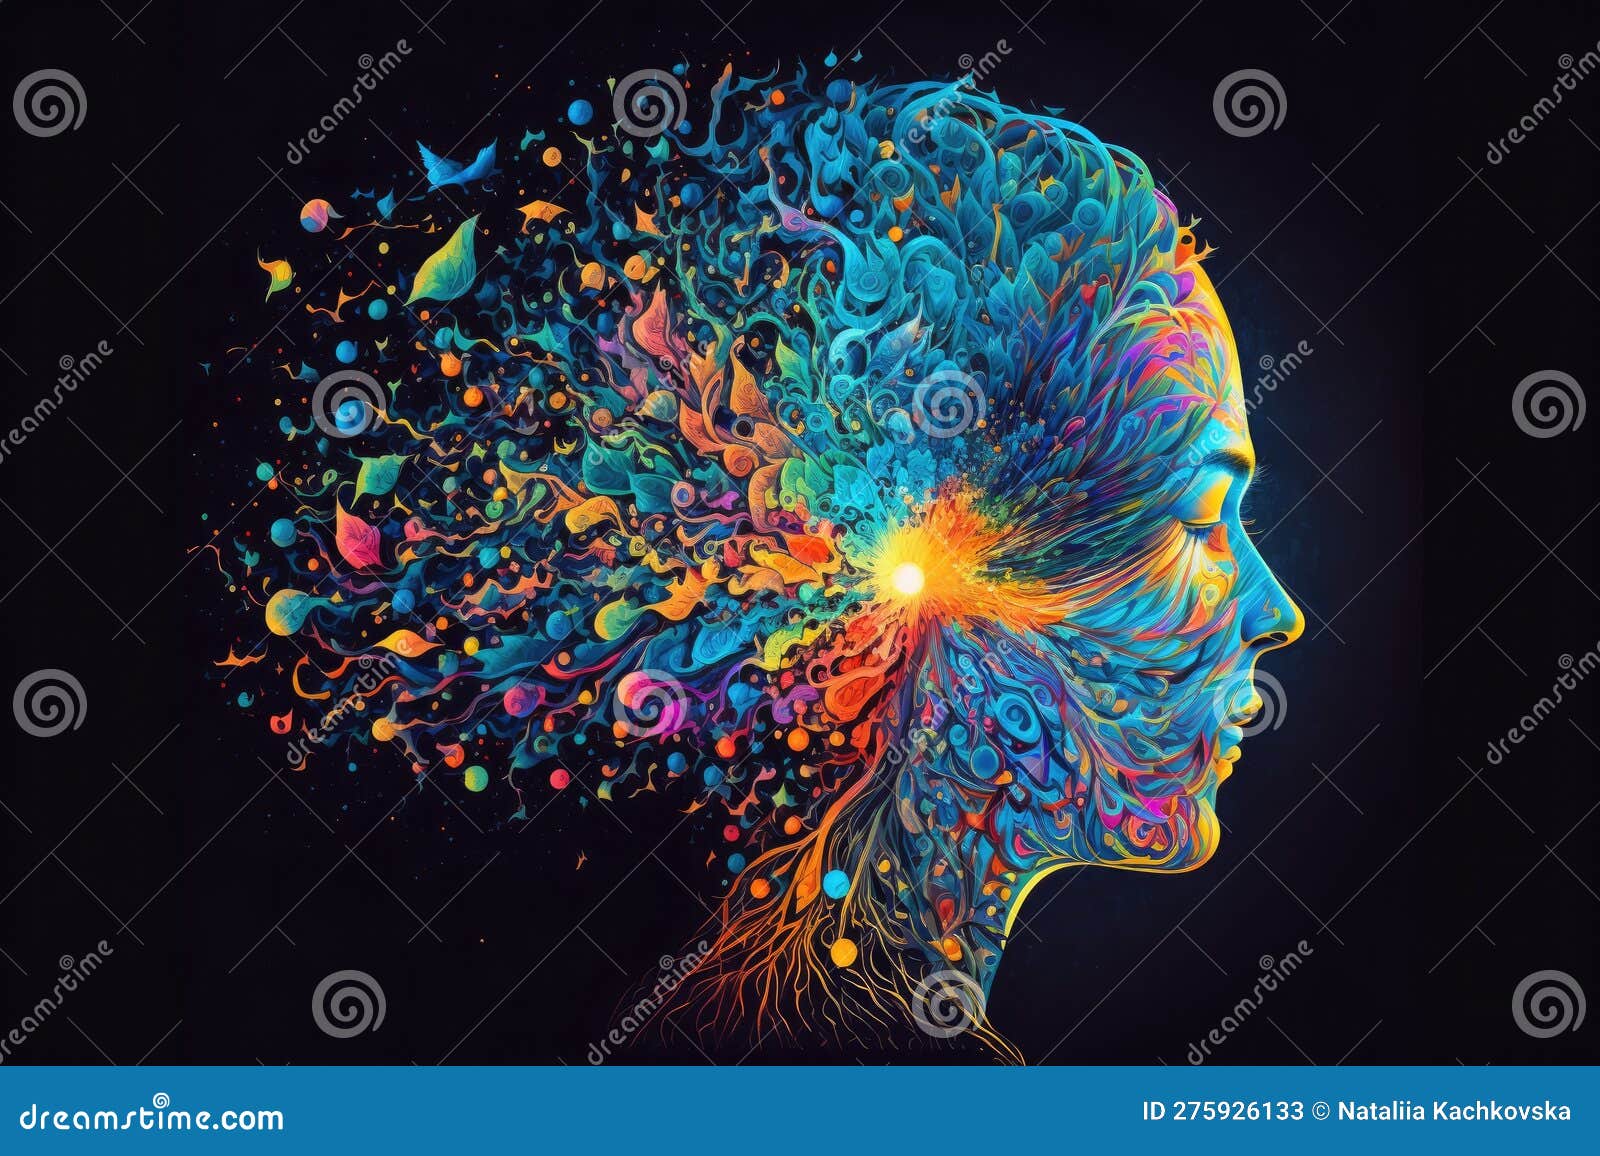 Art with Human Head Burst with Colors Stock Illustration - Illustration ...